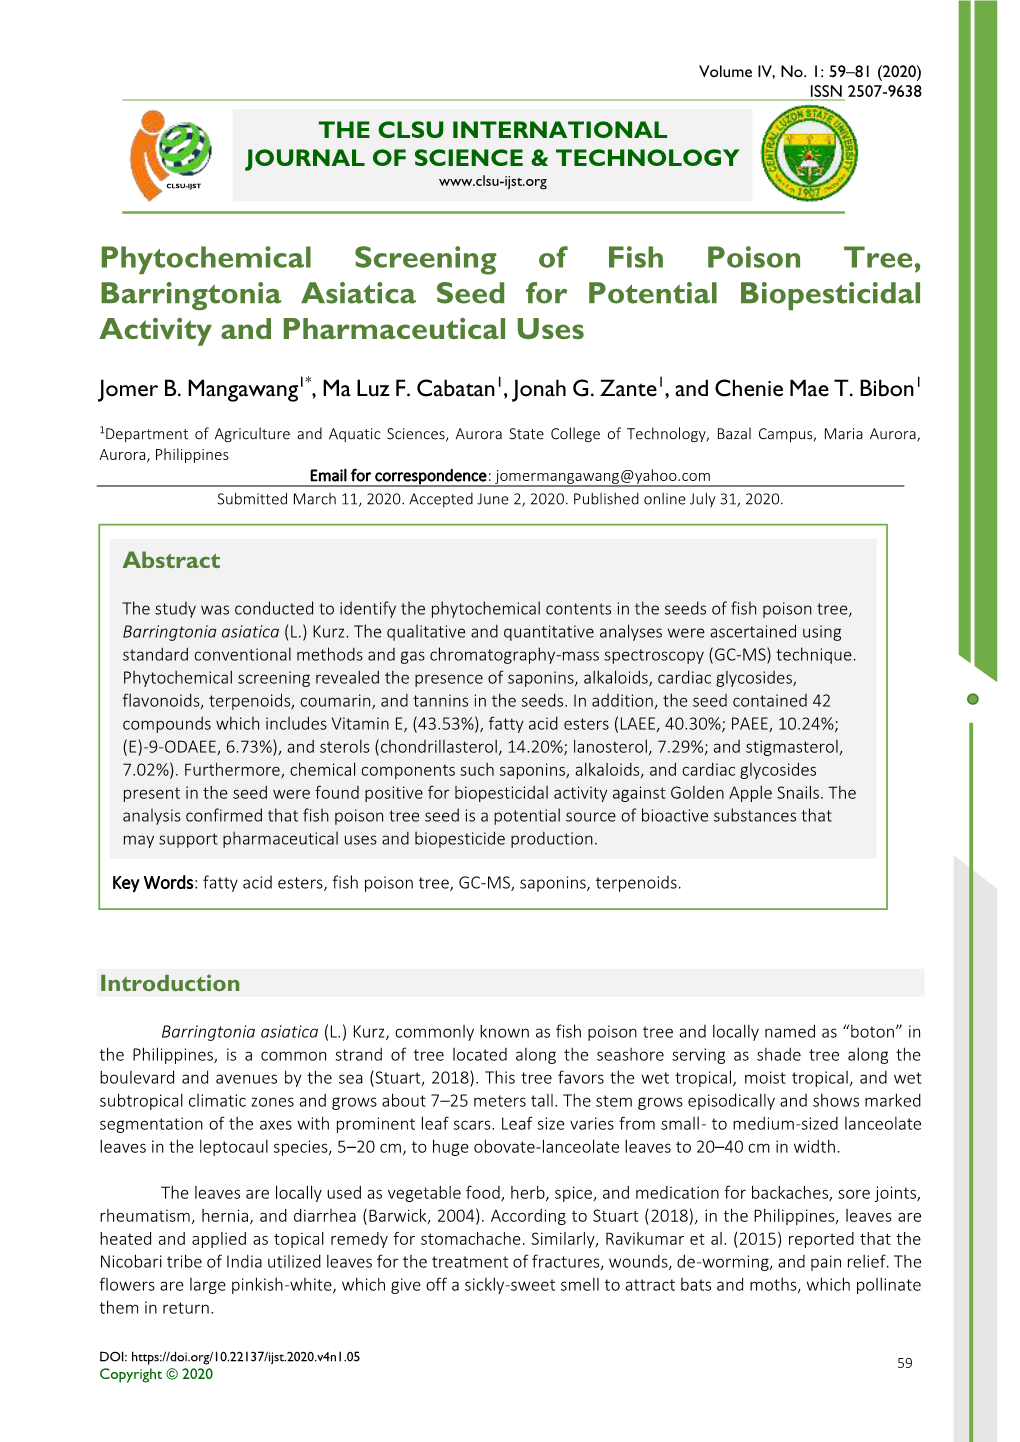 Phytochemical Screening of Fish Poison Tree, Barringtonia Asiatica Seed for Potential Biopesticidal Activity and Pharmaceutical Uses